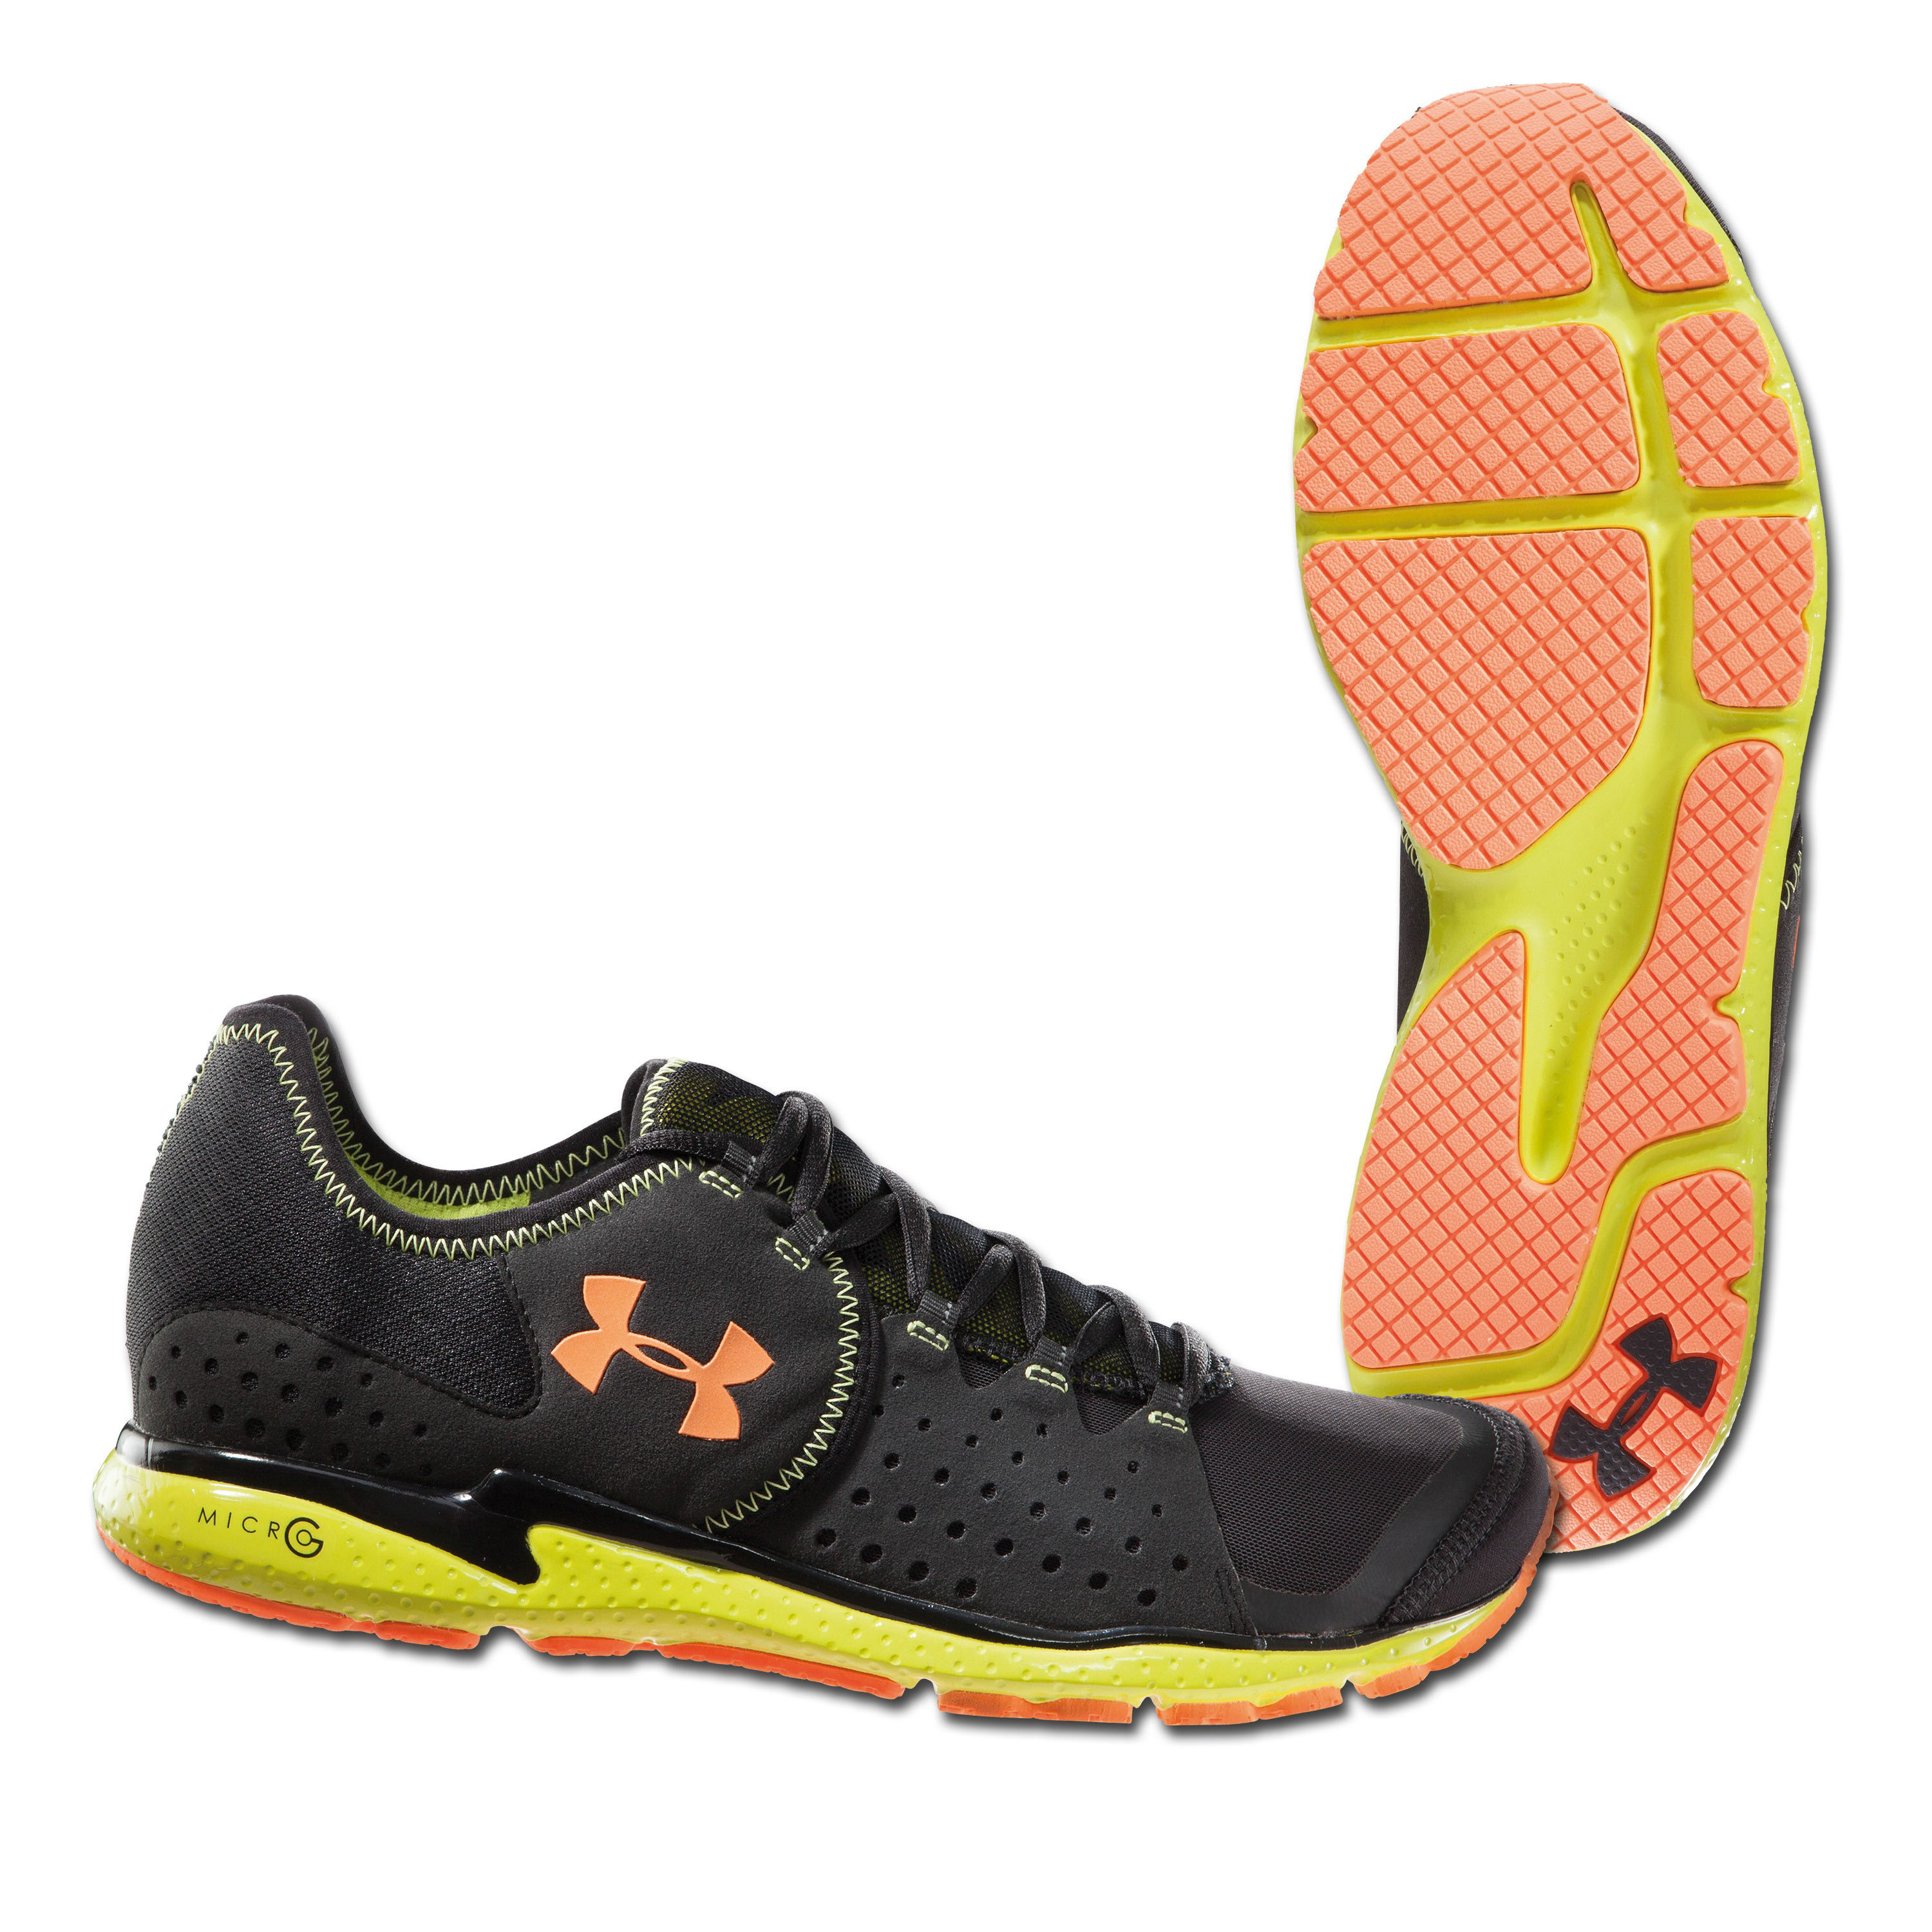 Under Armour Running Shoe Micro G 